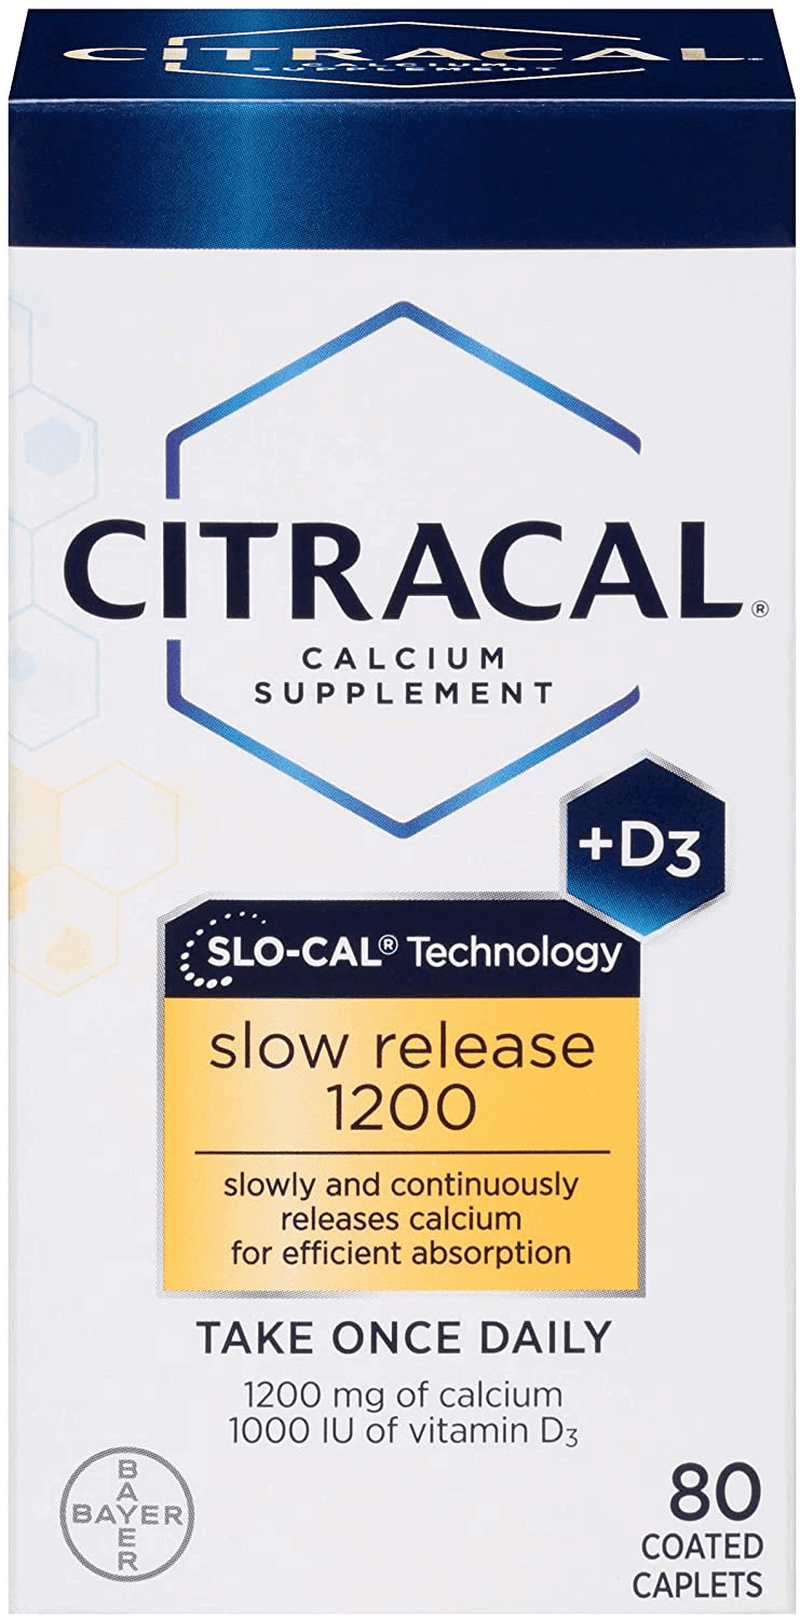 Citracal Slow Release 1200, 1200 mg Calcium Citrate and Calcium Carbonate Blend with 1000 IU Vitamin D3, Bone Health Supplement for Adults, Once Daily Caplets, 80 Count - vitamenstore.com